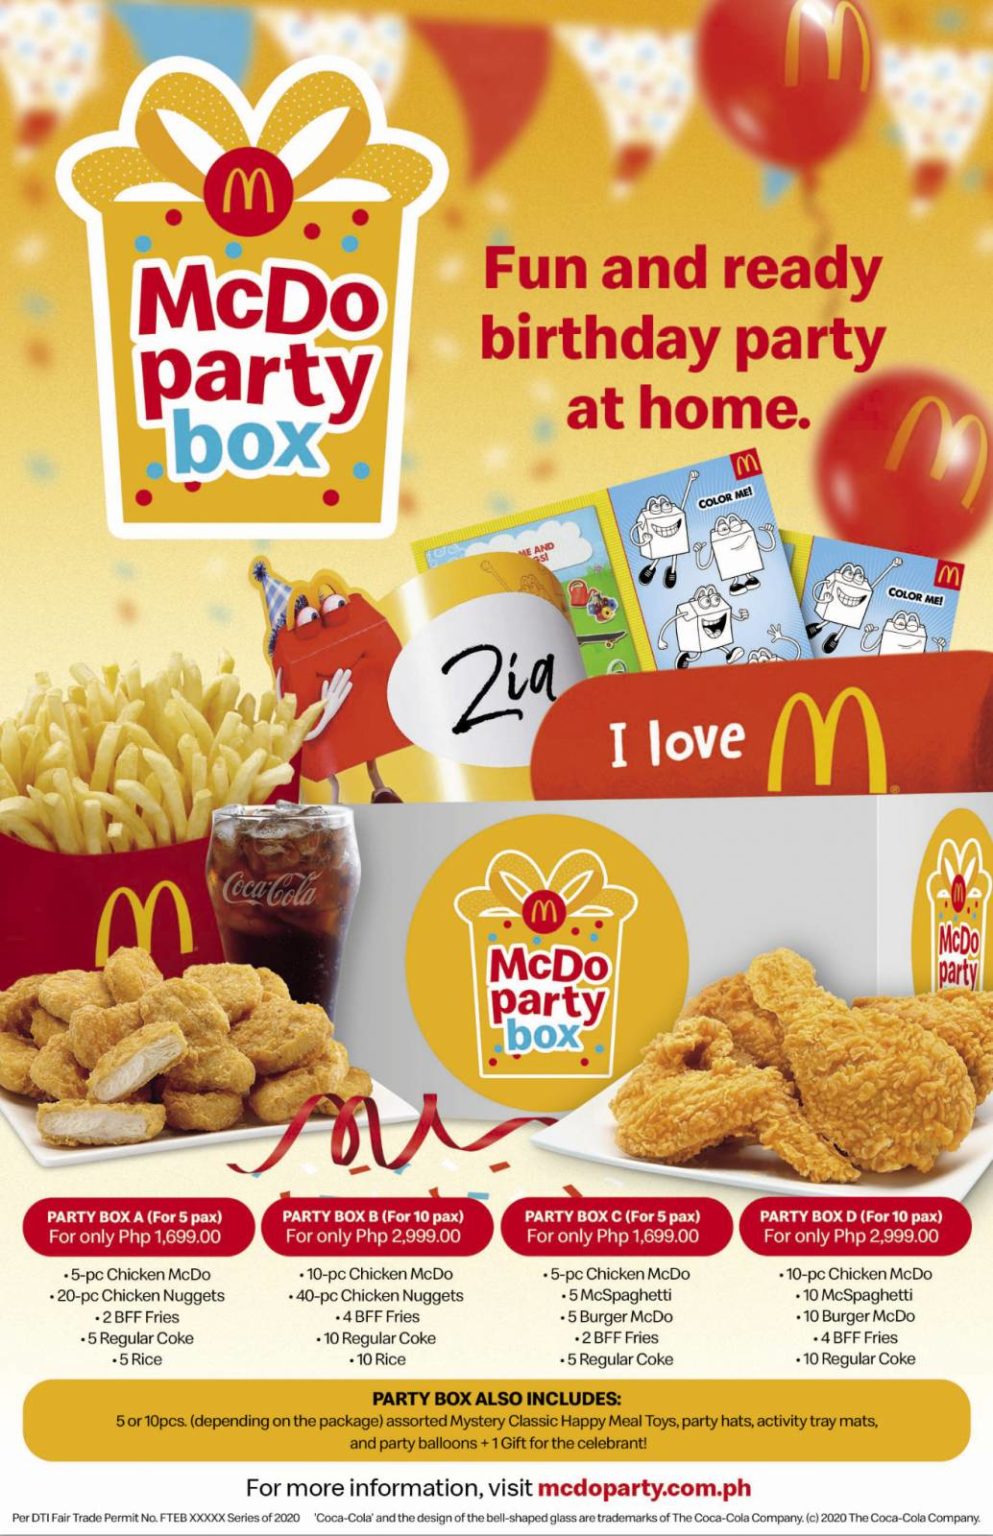 Bring home the celebration with the new Mcdo Party Box